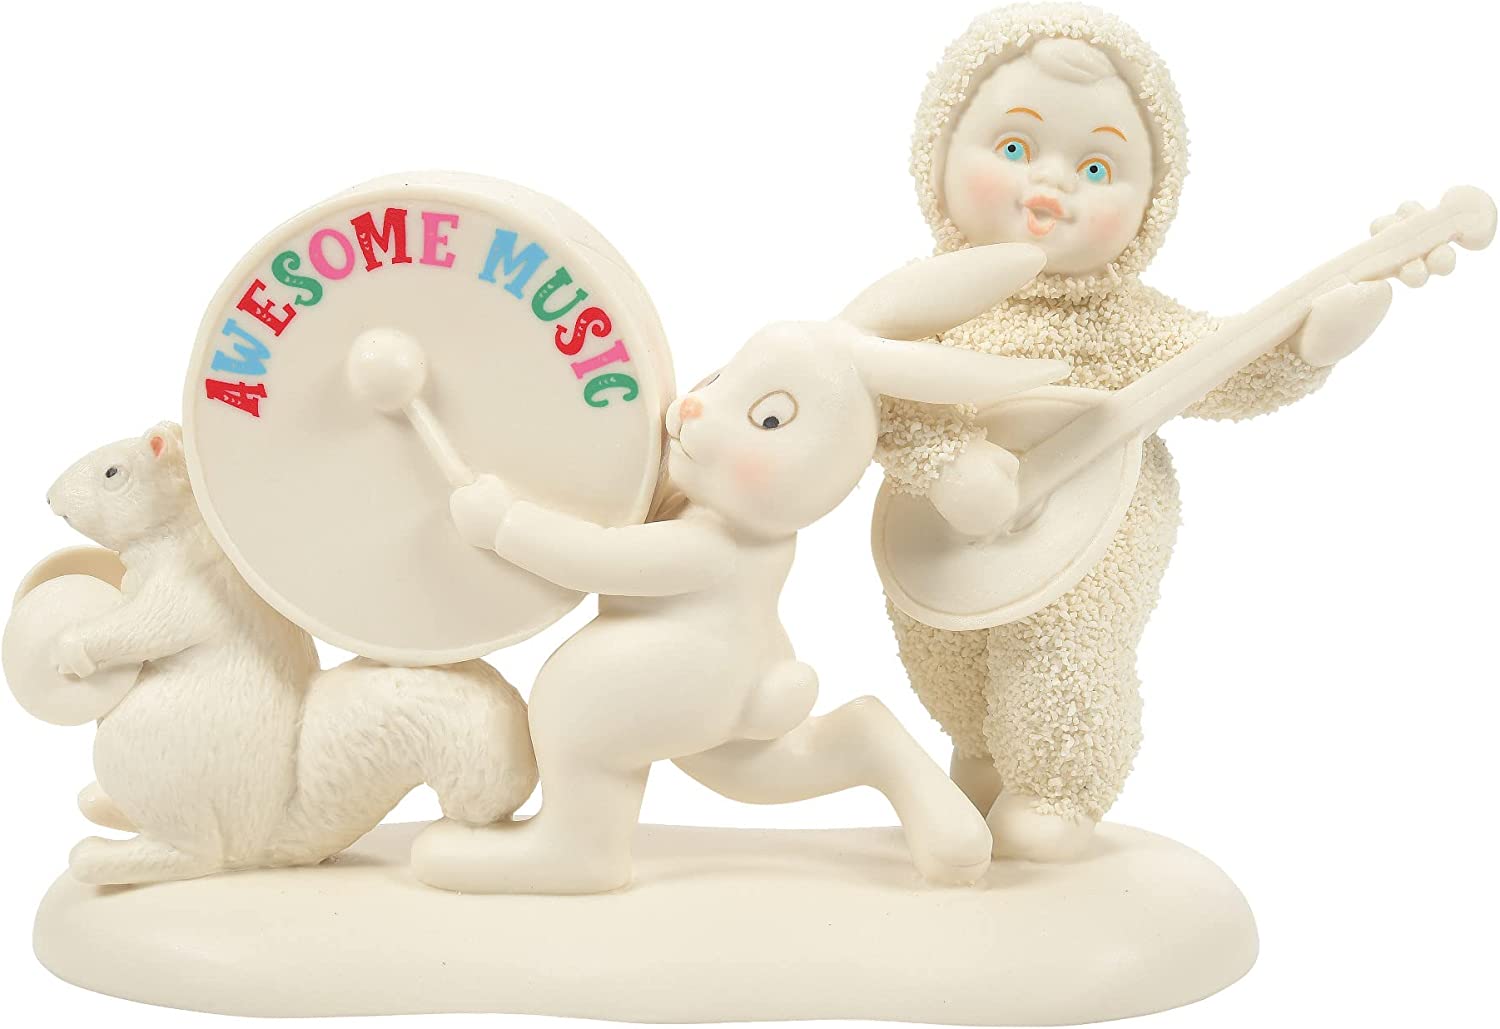 Department 56 Snowbabies Awesome Music Figurine